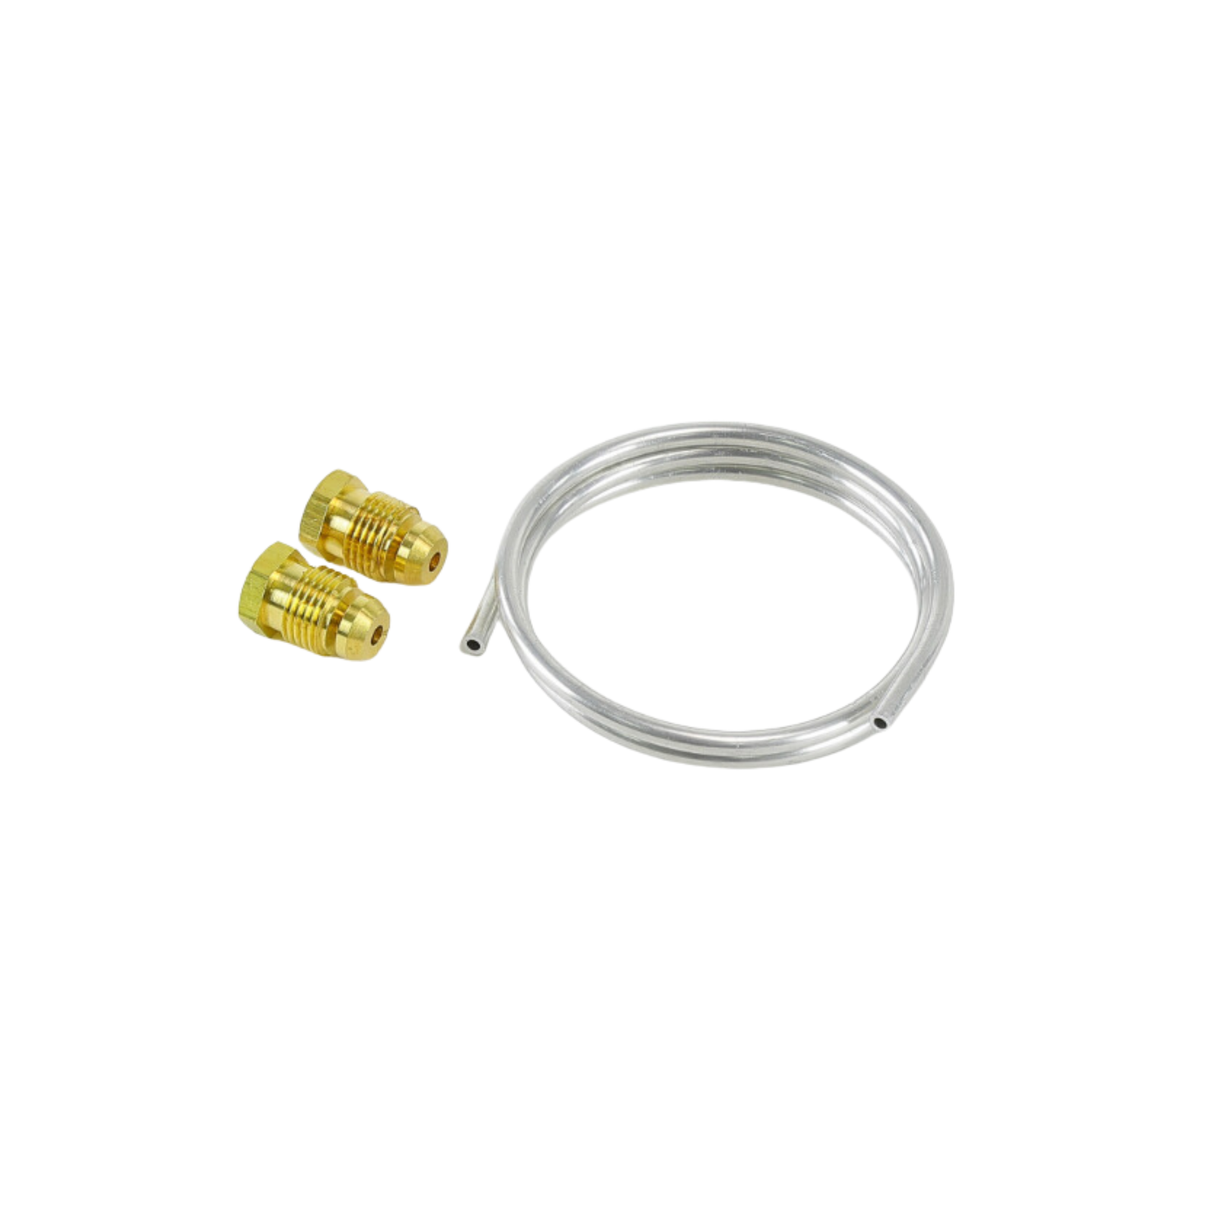 Baso Y99AR-2 Aluminum, Pilot Gas Burner Tubing with 1/8" Tube Packaged and 2 1/8" Compression Fittings